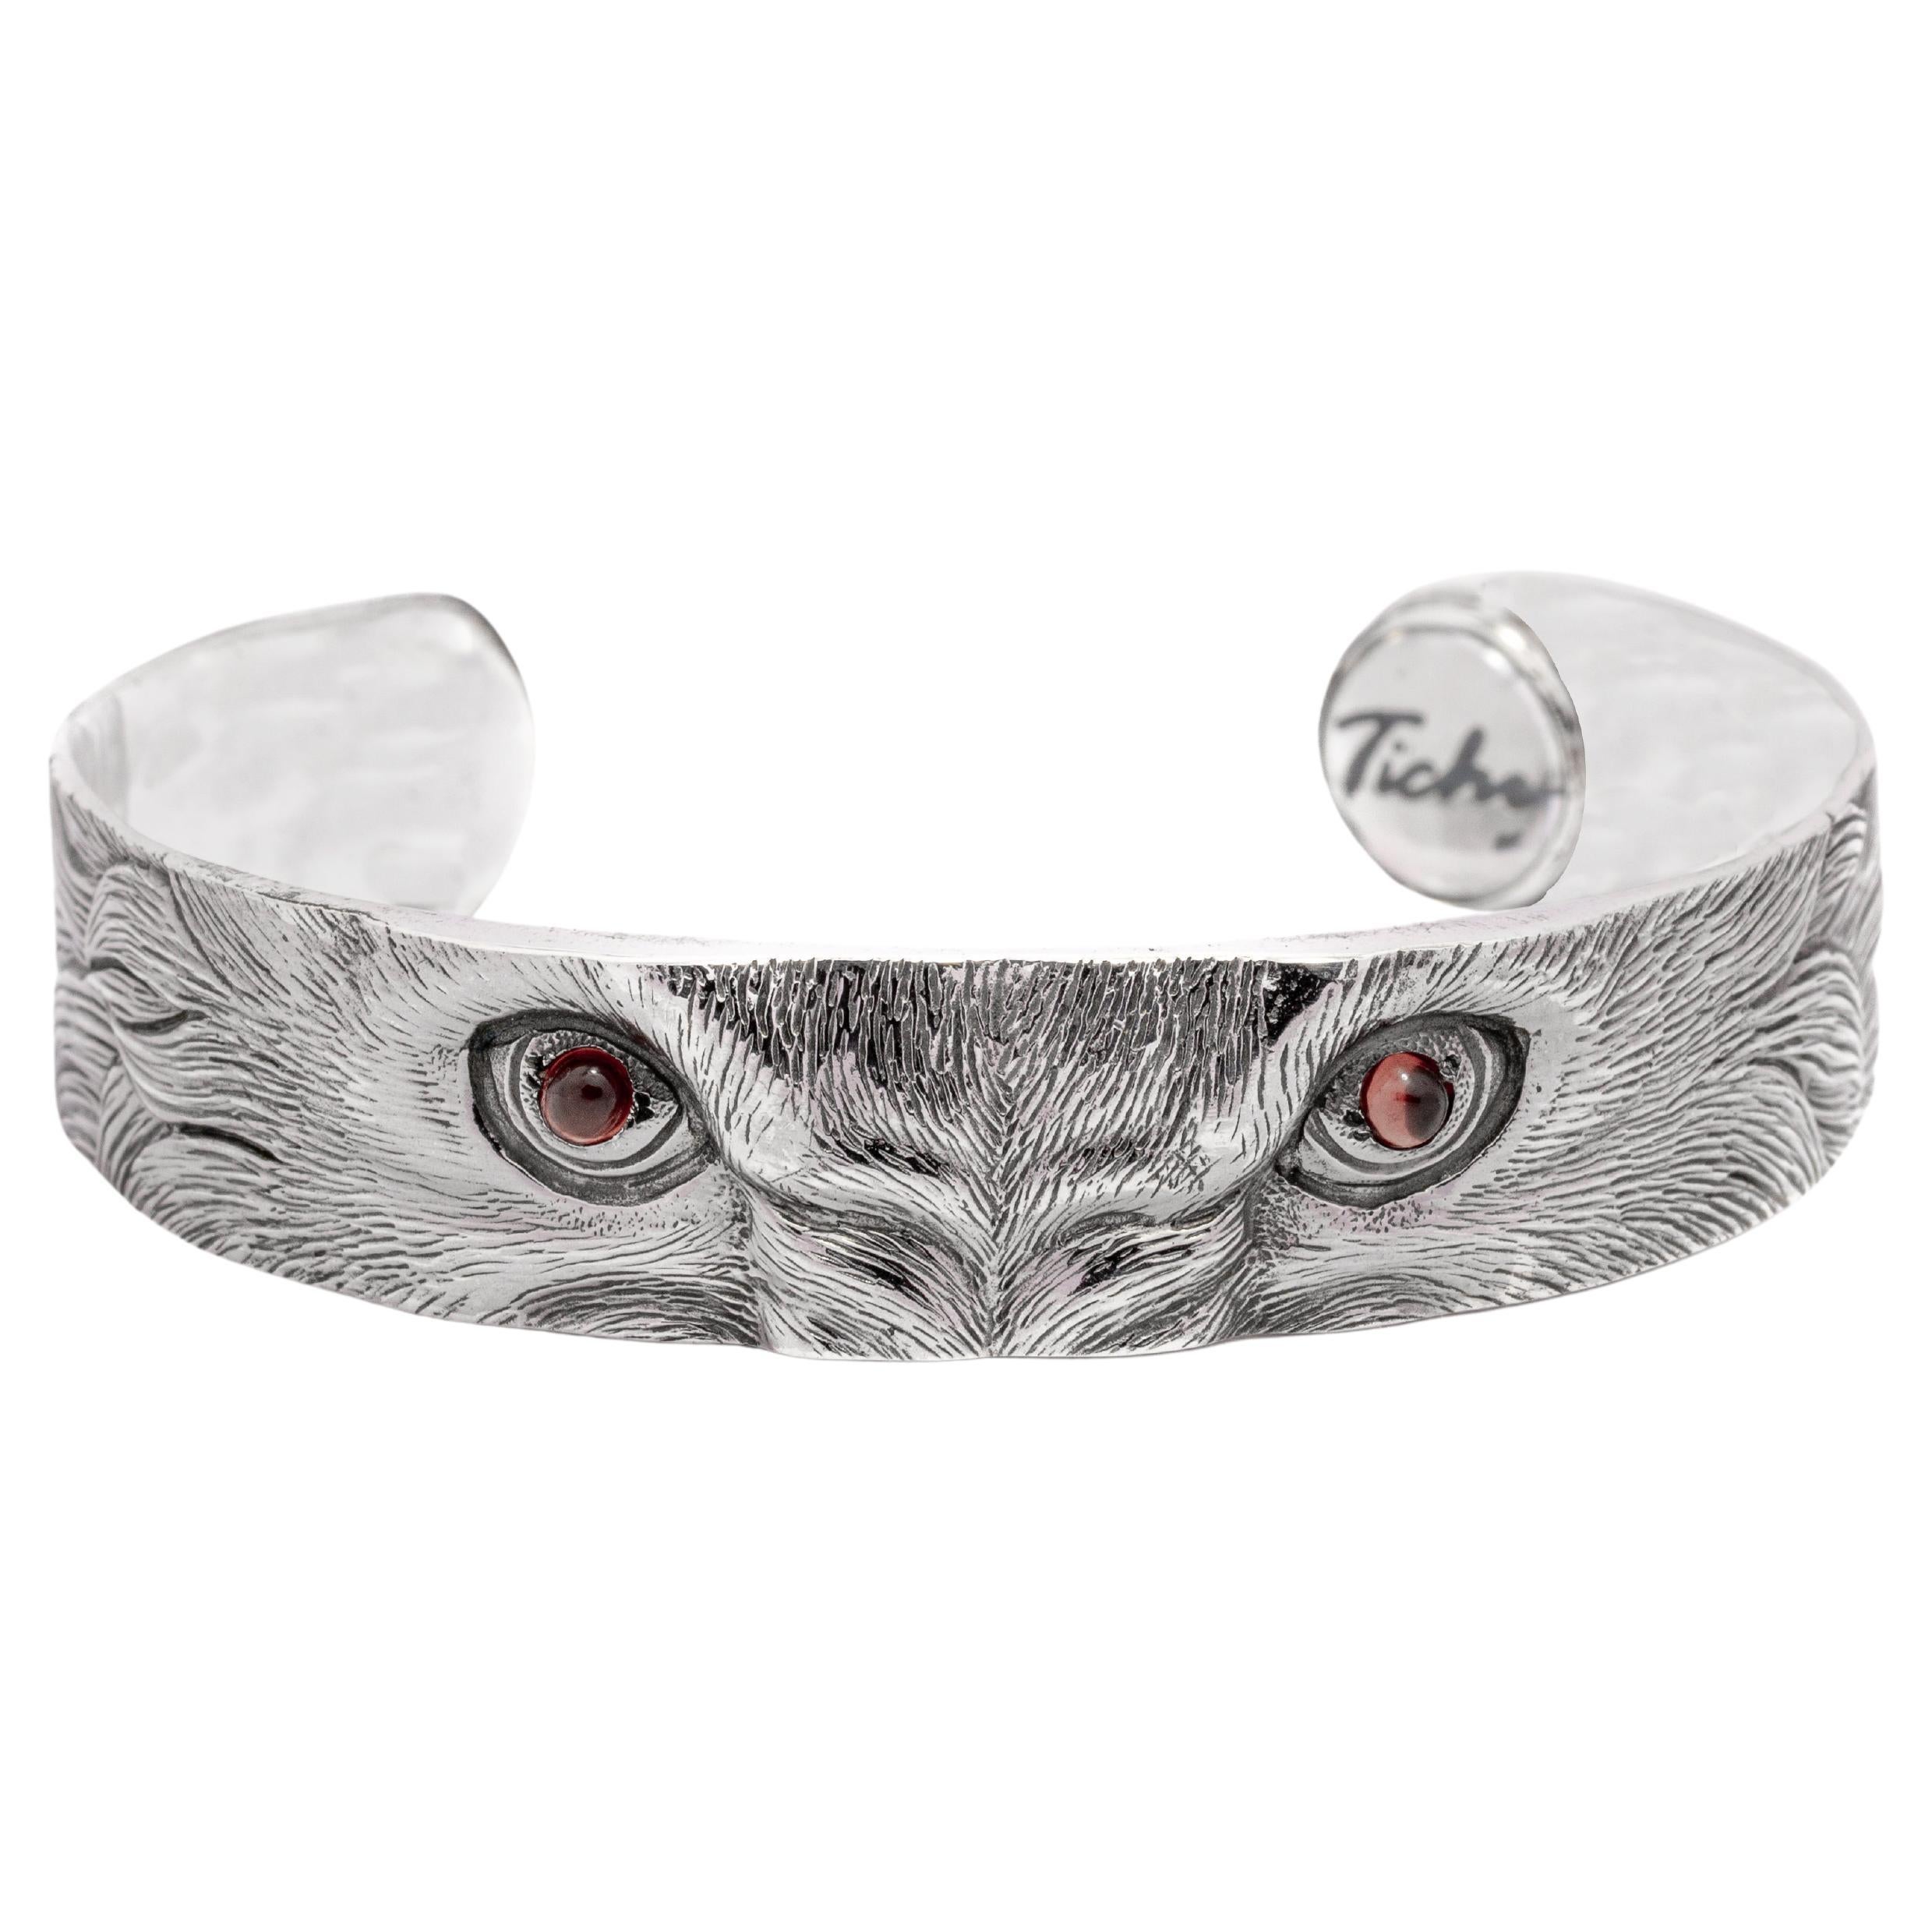 Tichu Citrine Lion Eyes Cuff in Sterling Silver and Crystal Quartz, 'Size L' For Sale